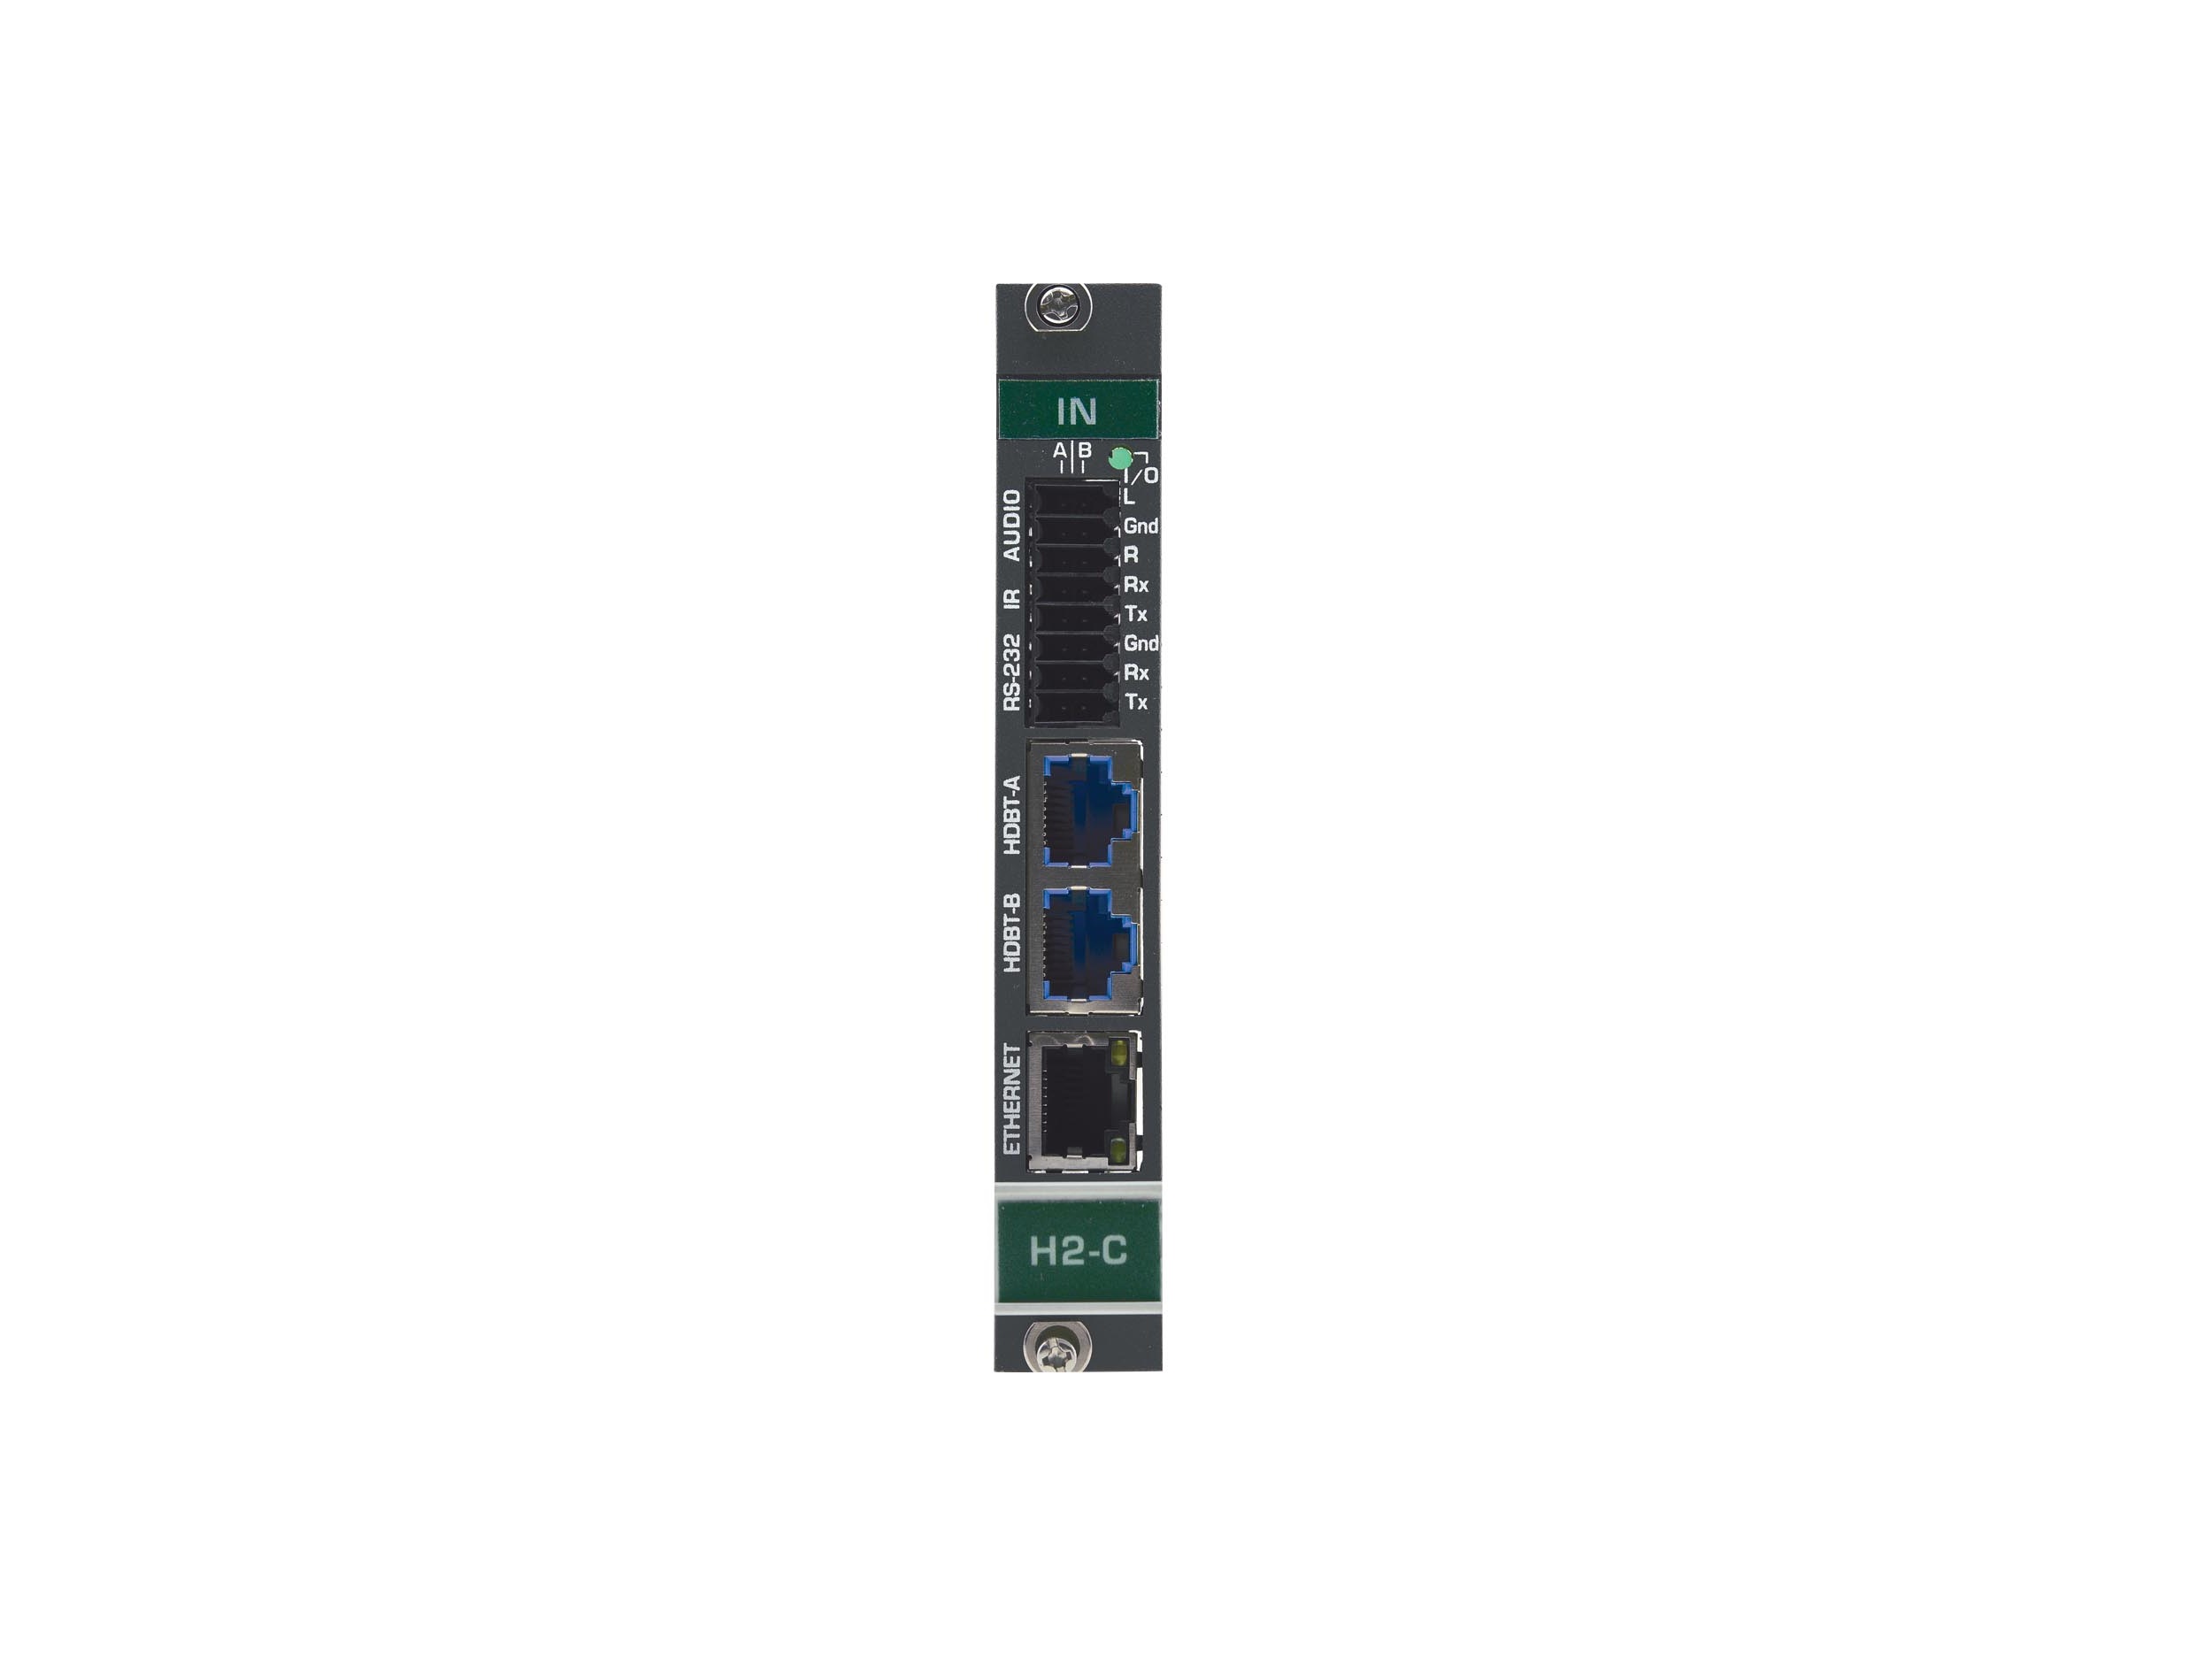 DTAXRC2-IN2-F34 2-Channel 4K HDR HDMI over HDBaseT Input Card with Analog Audio and PoE Provider by Kramer